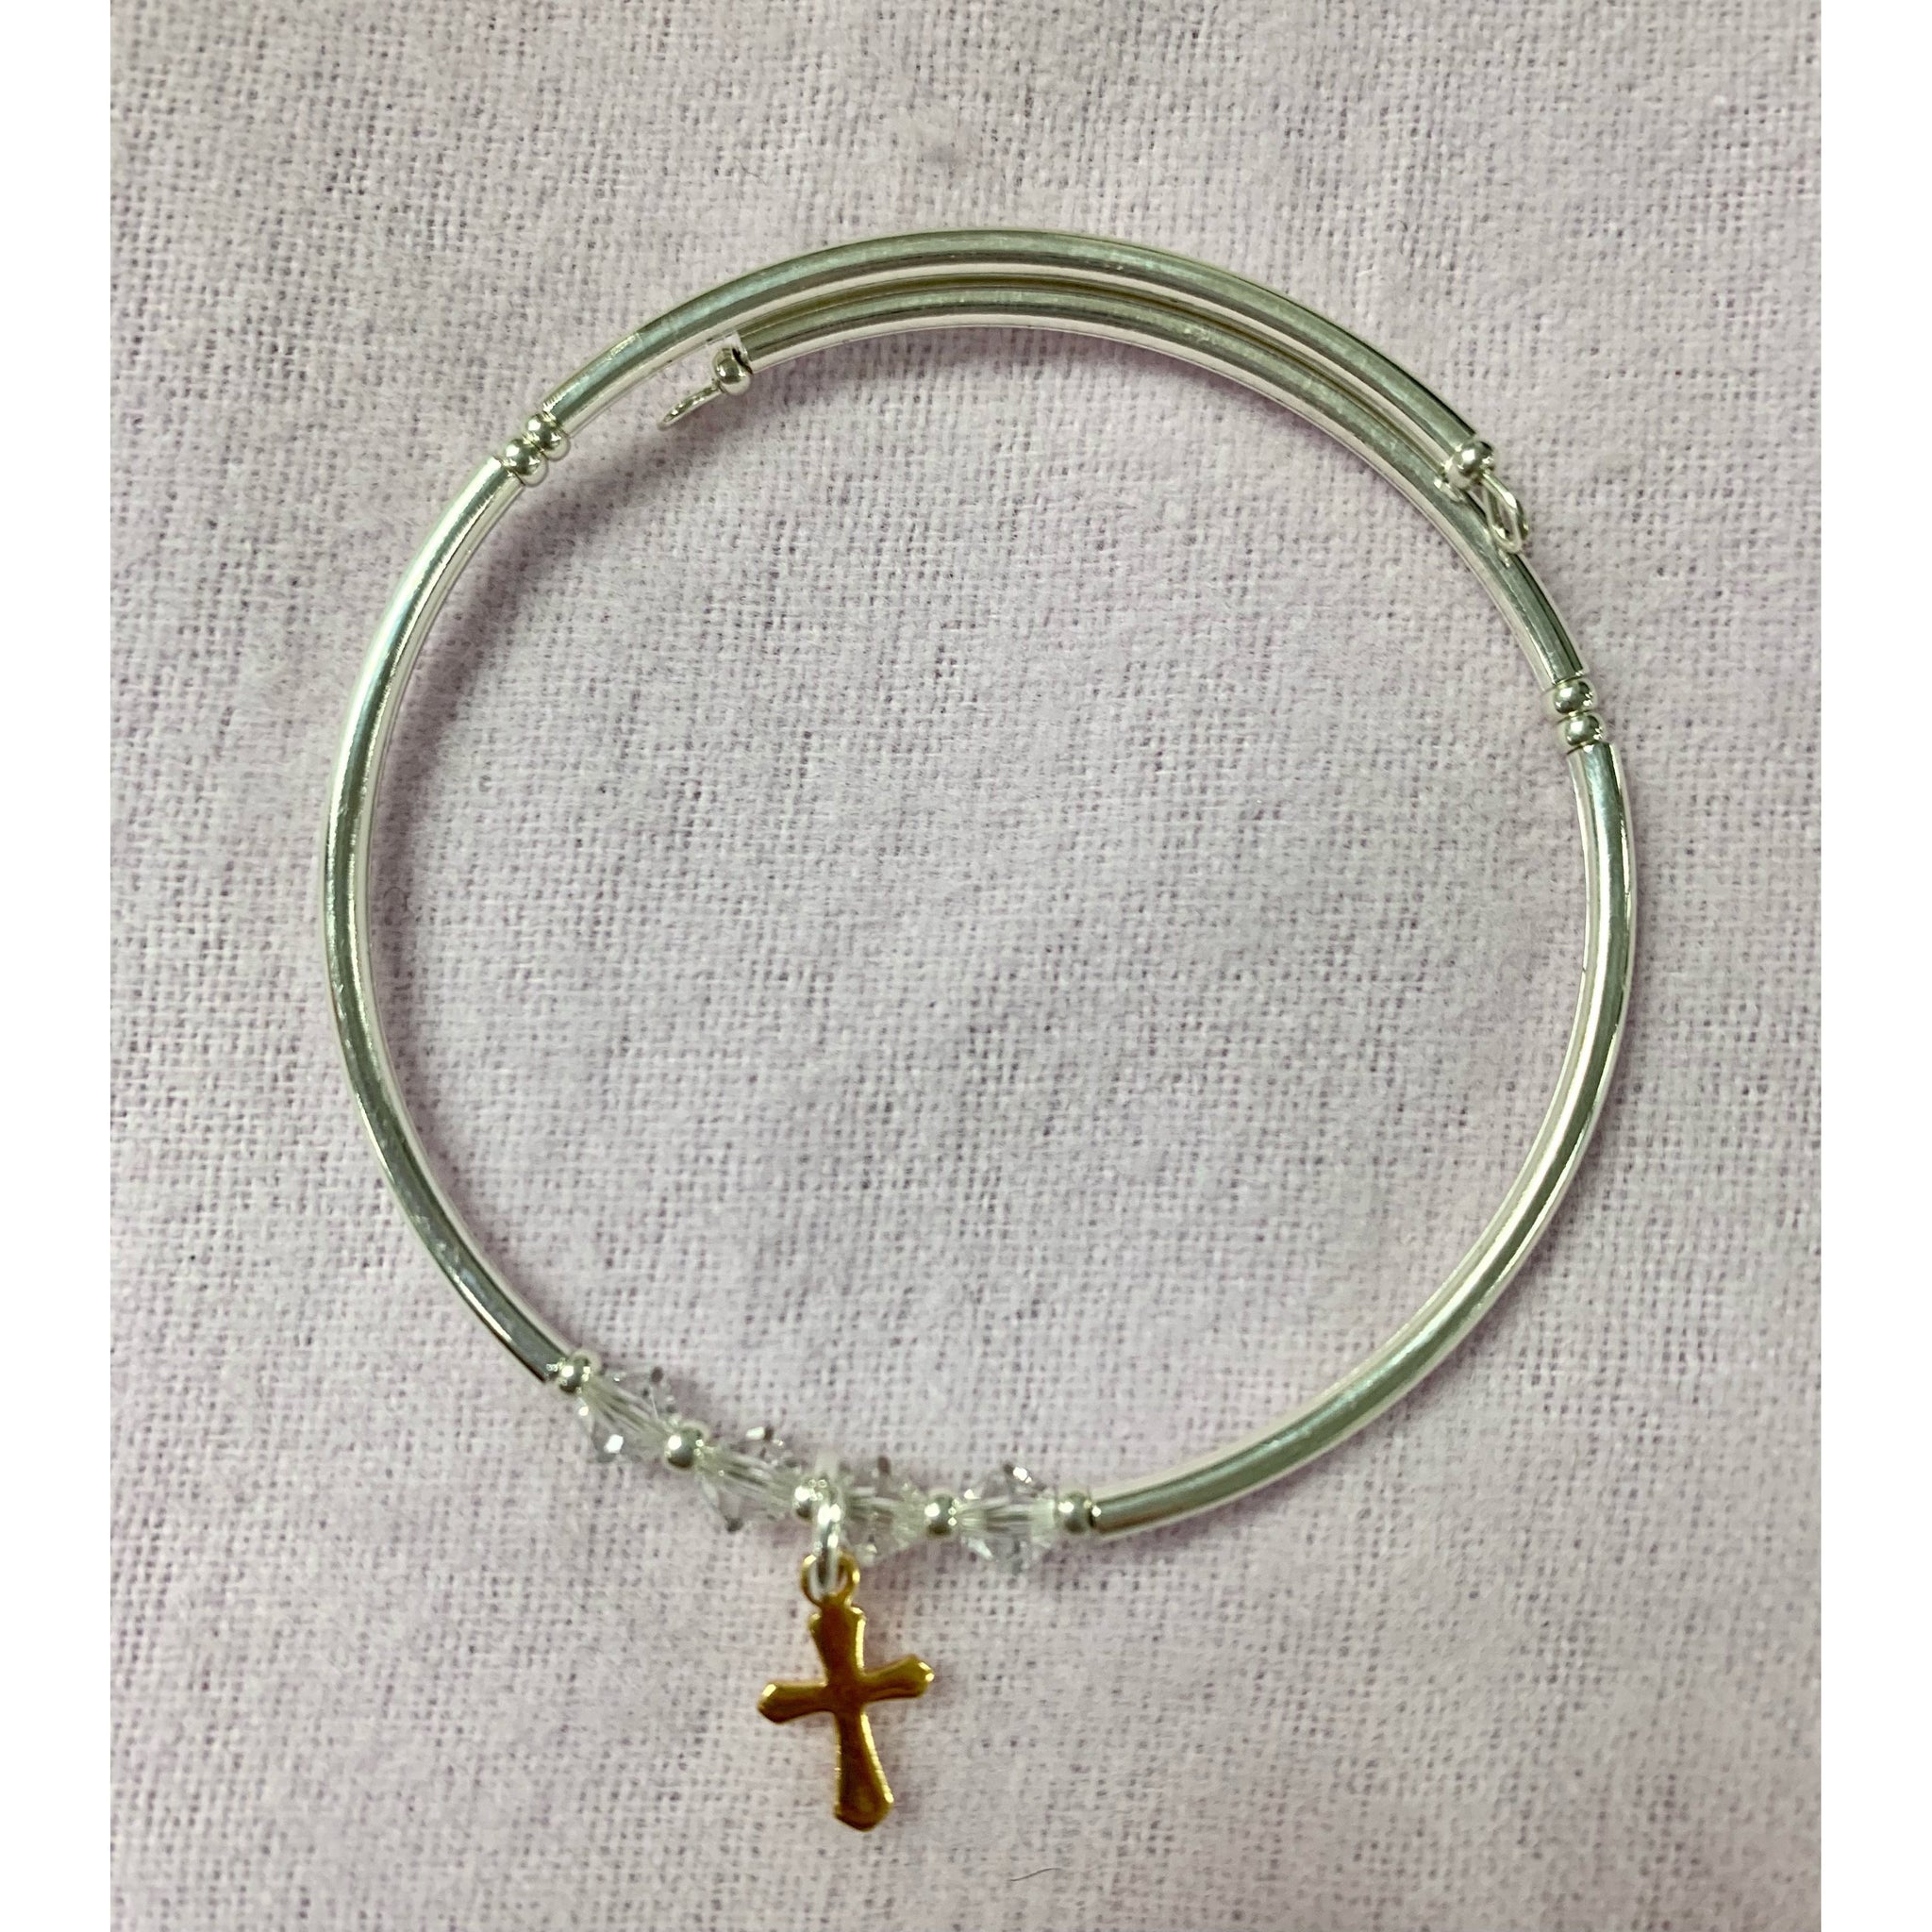 Adjustable Gold Cross Bracelet with crystals and a cross charm